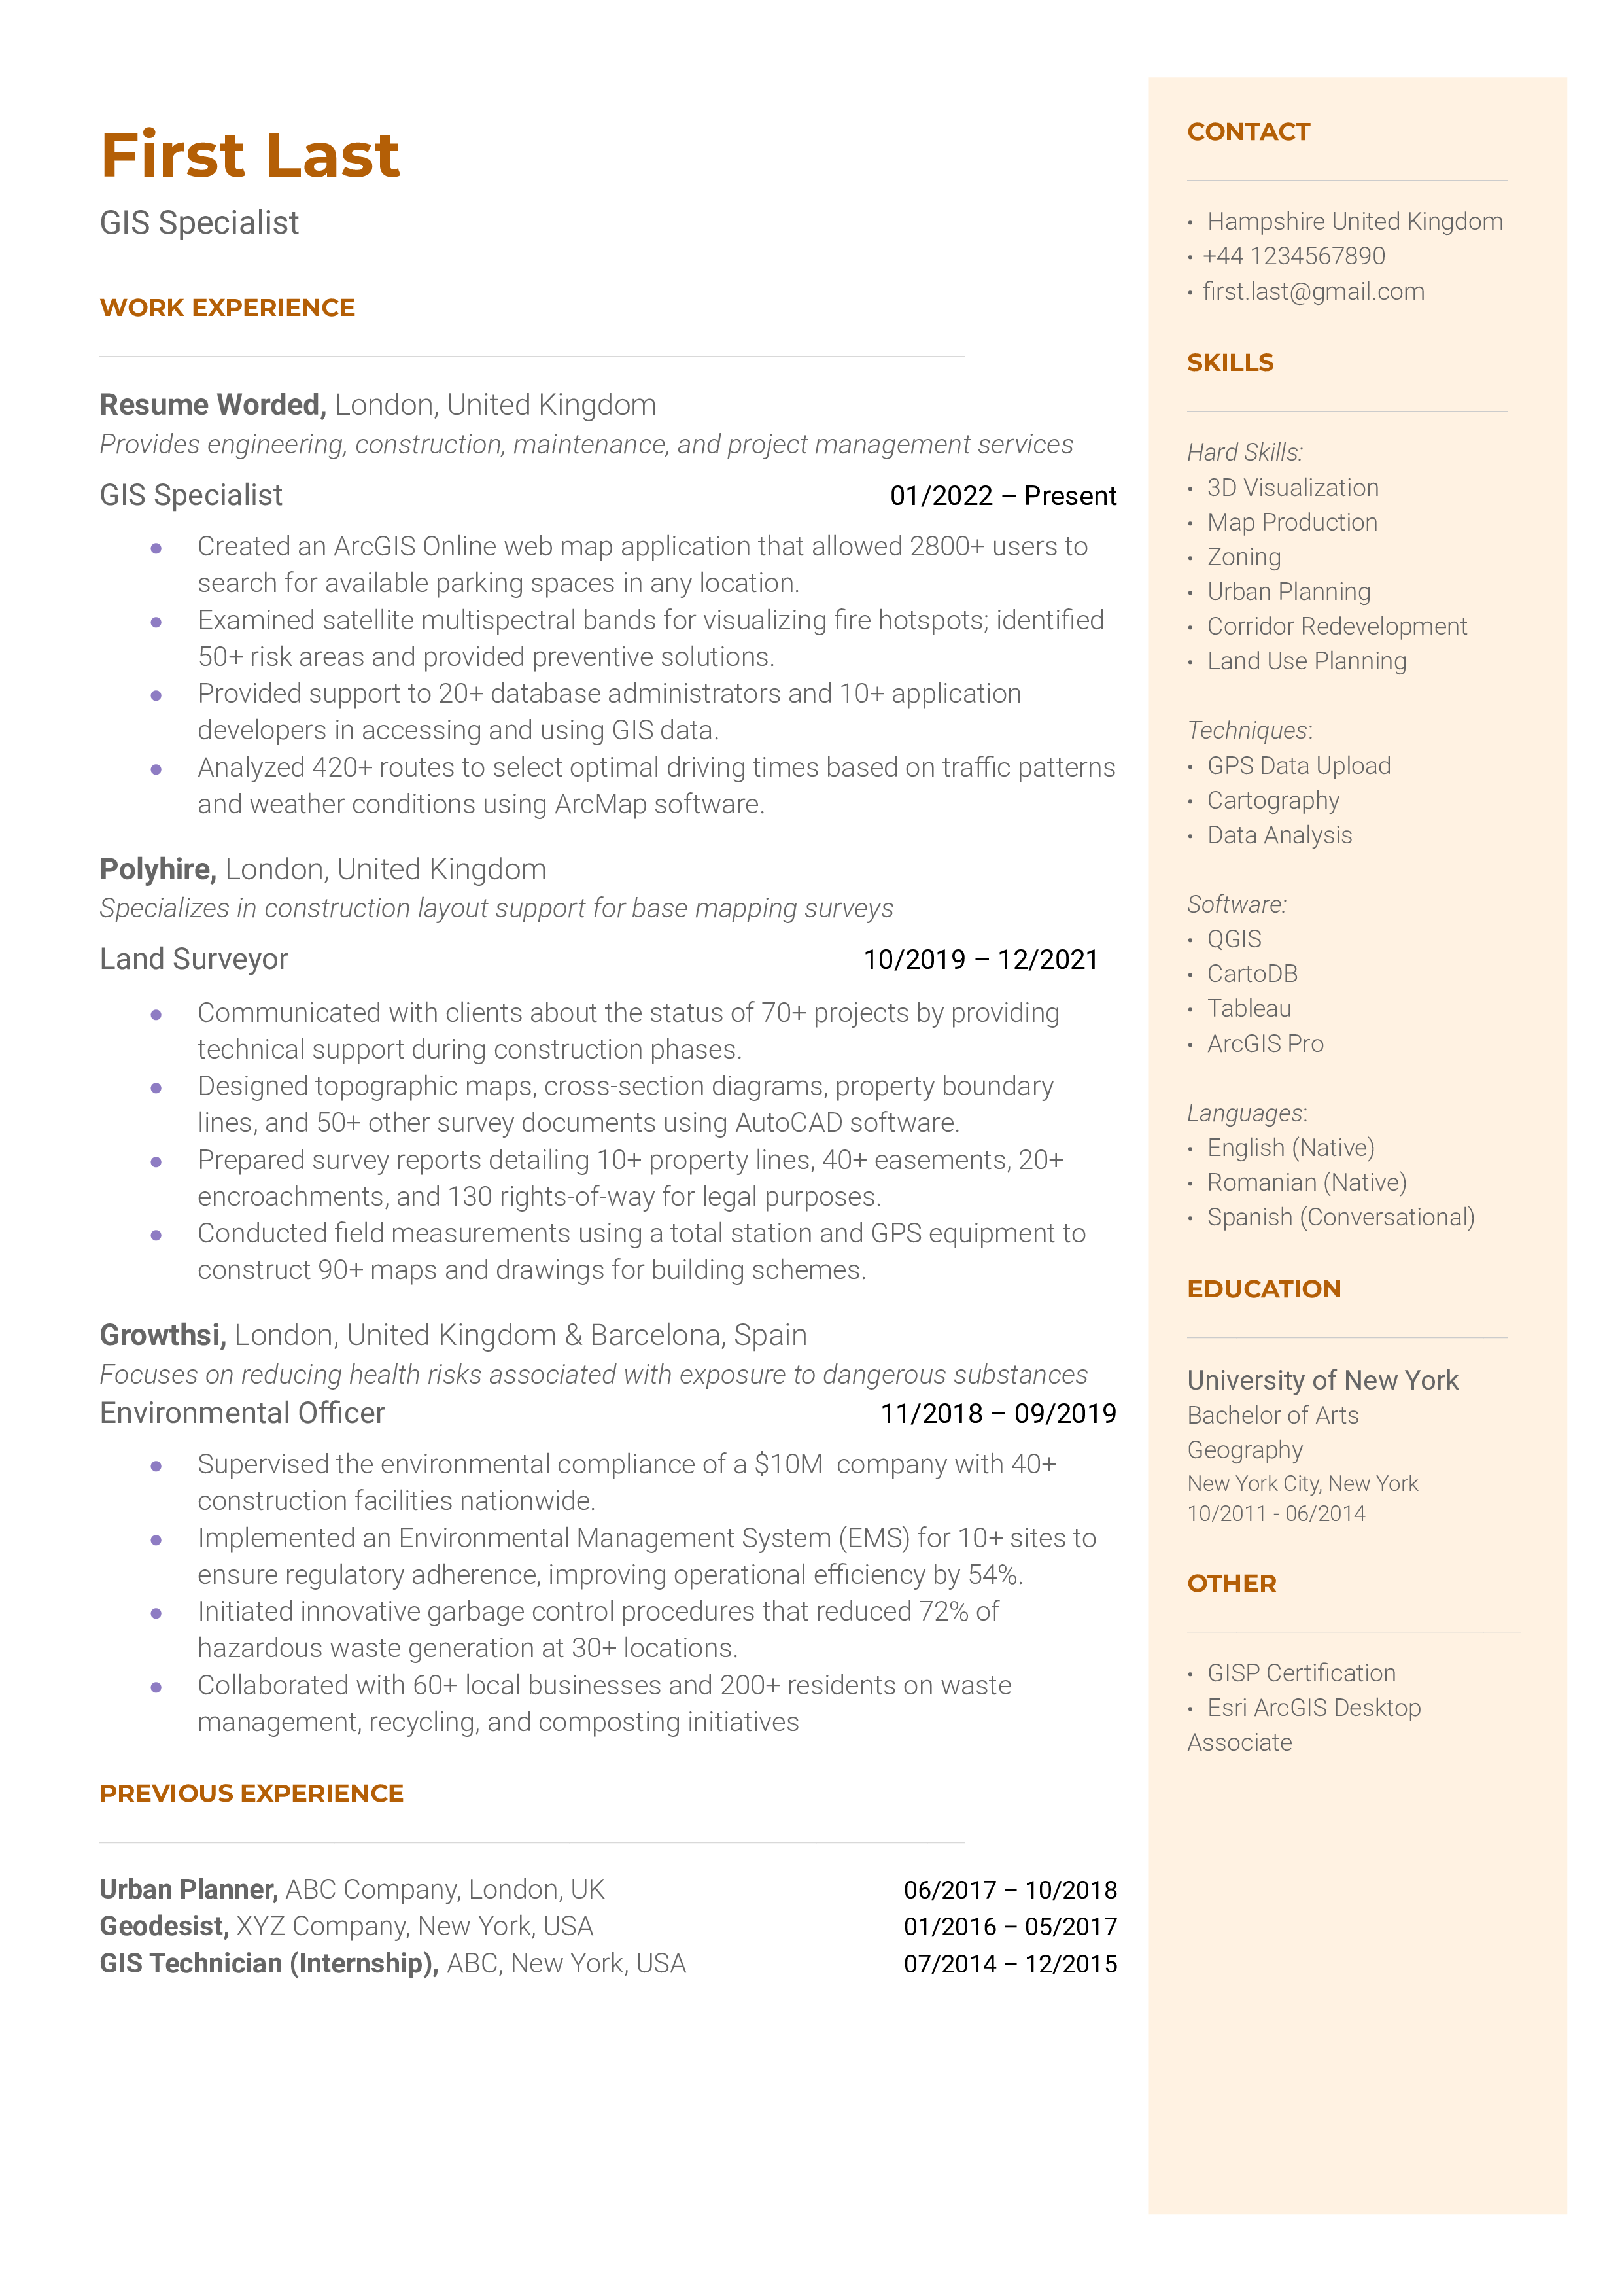 A GIS specialist resume template highlighting technical skills.